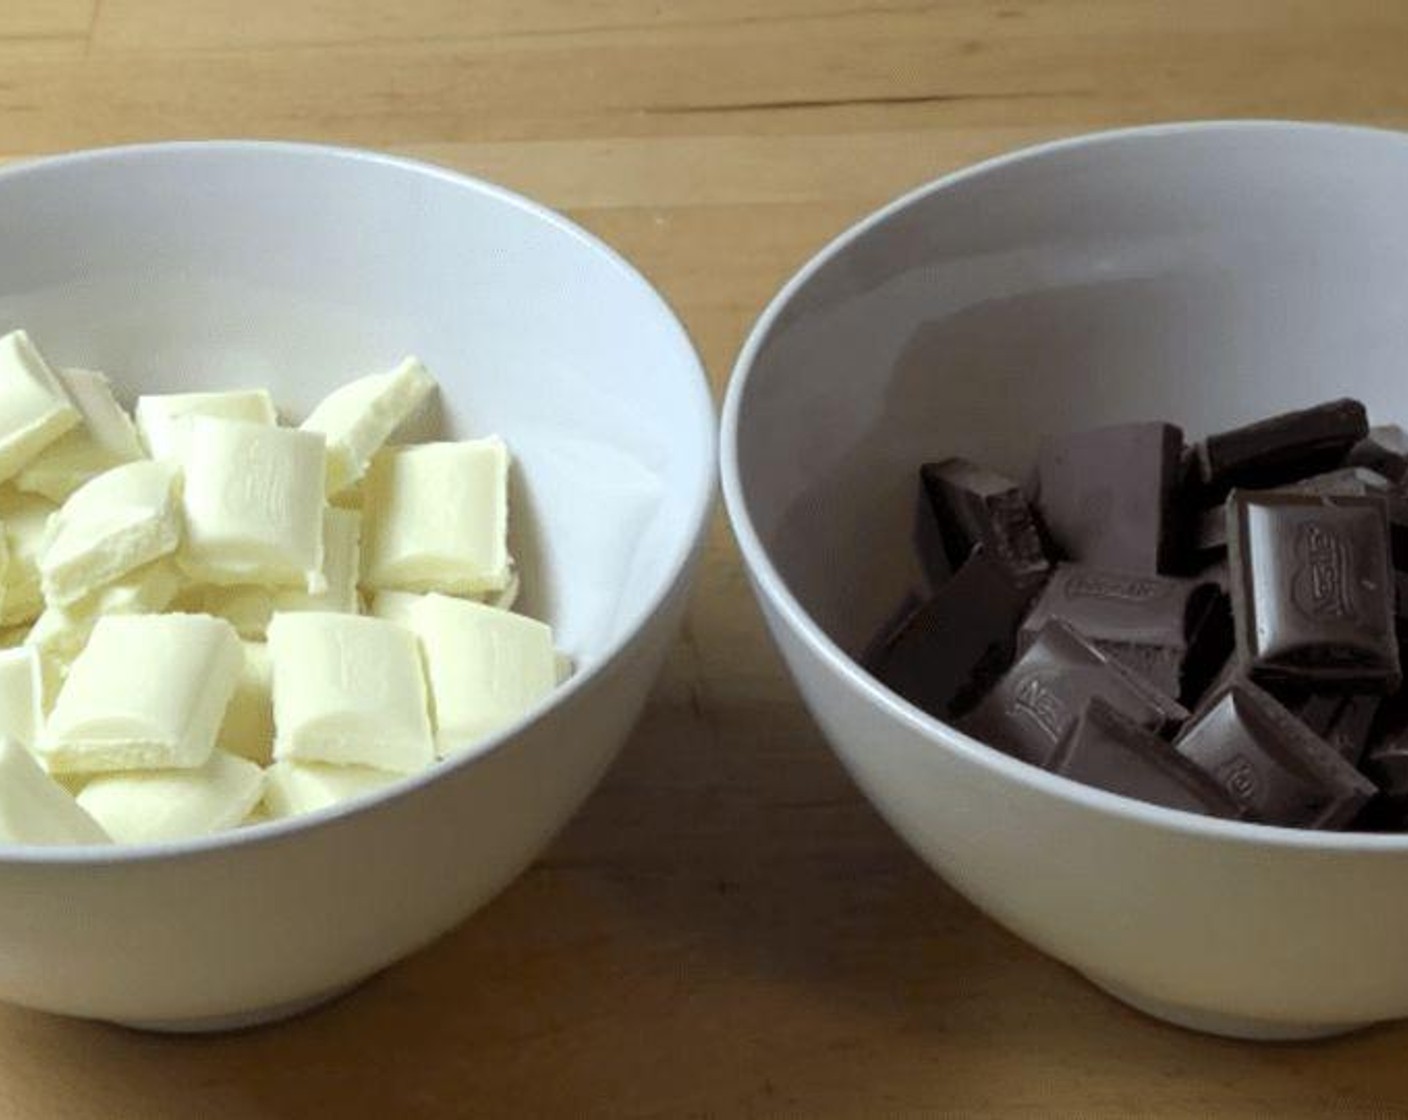 step 1 Put the White Chocolate (1 cup) and the Dark Chocolate (1 cup) pieces into separate bowls. Melt the chocolate in both bowls.